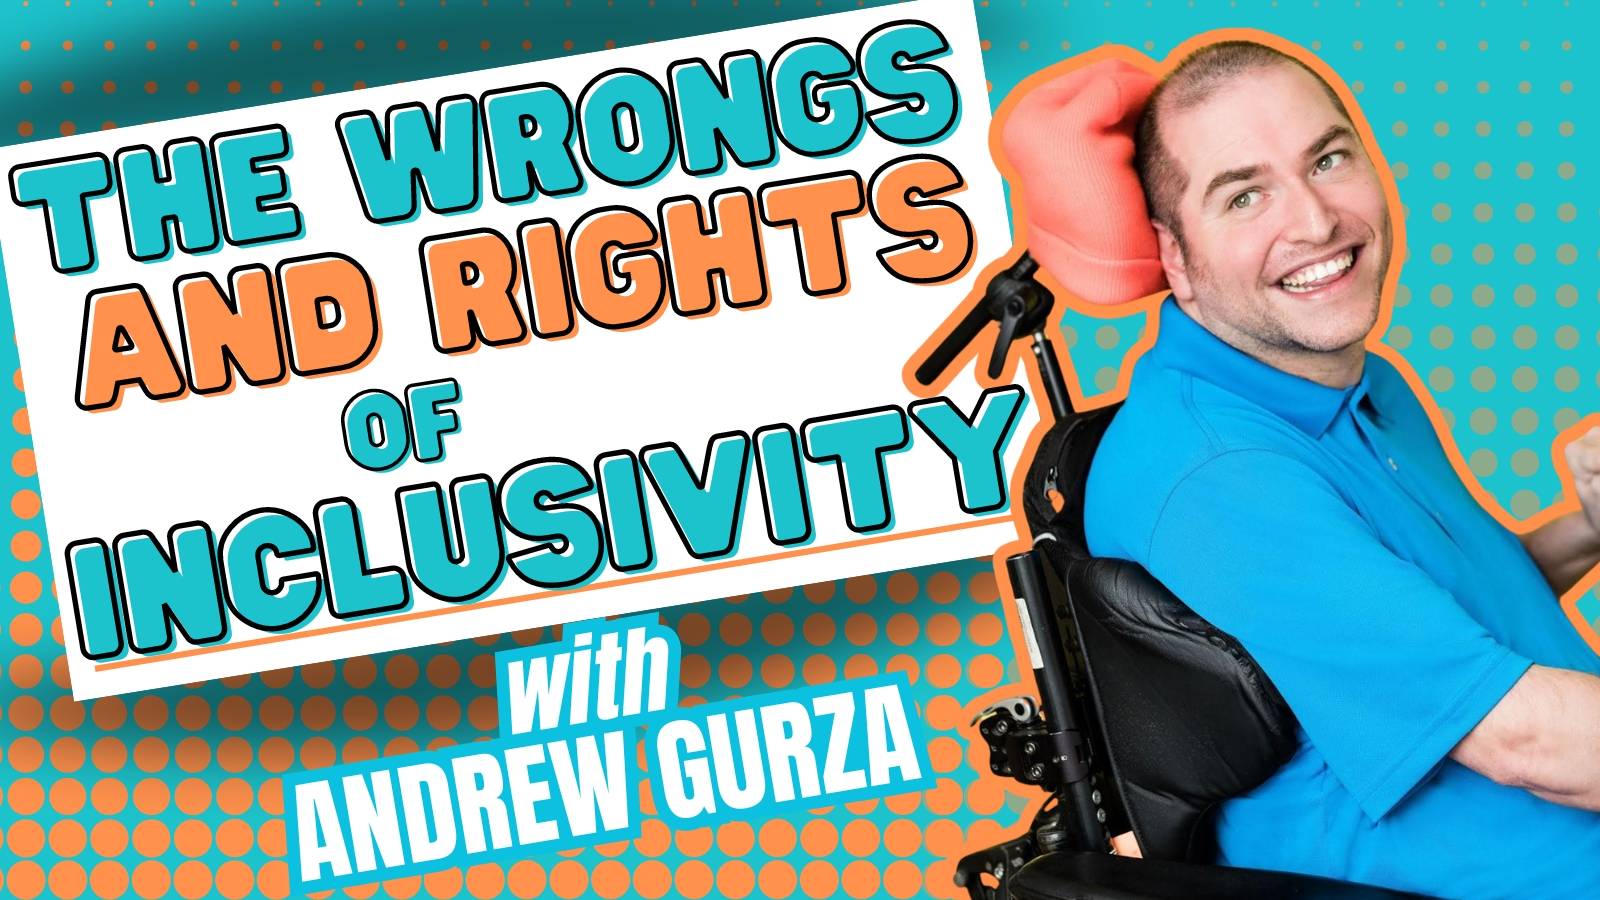 The Wrongs and Rights of Inclusivity with Andrew Gurza